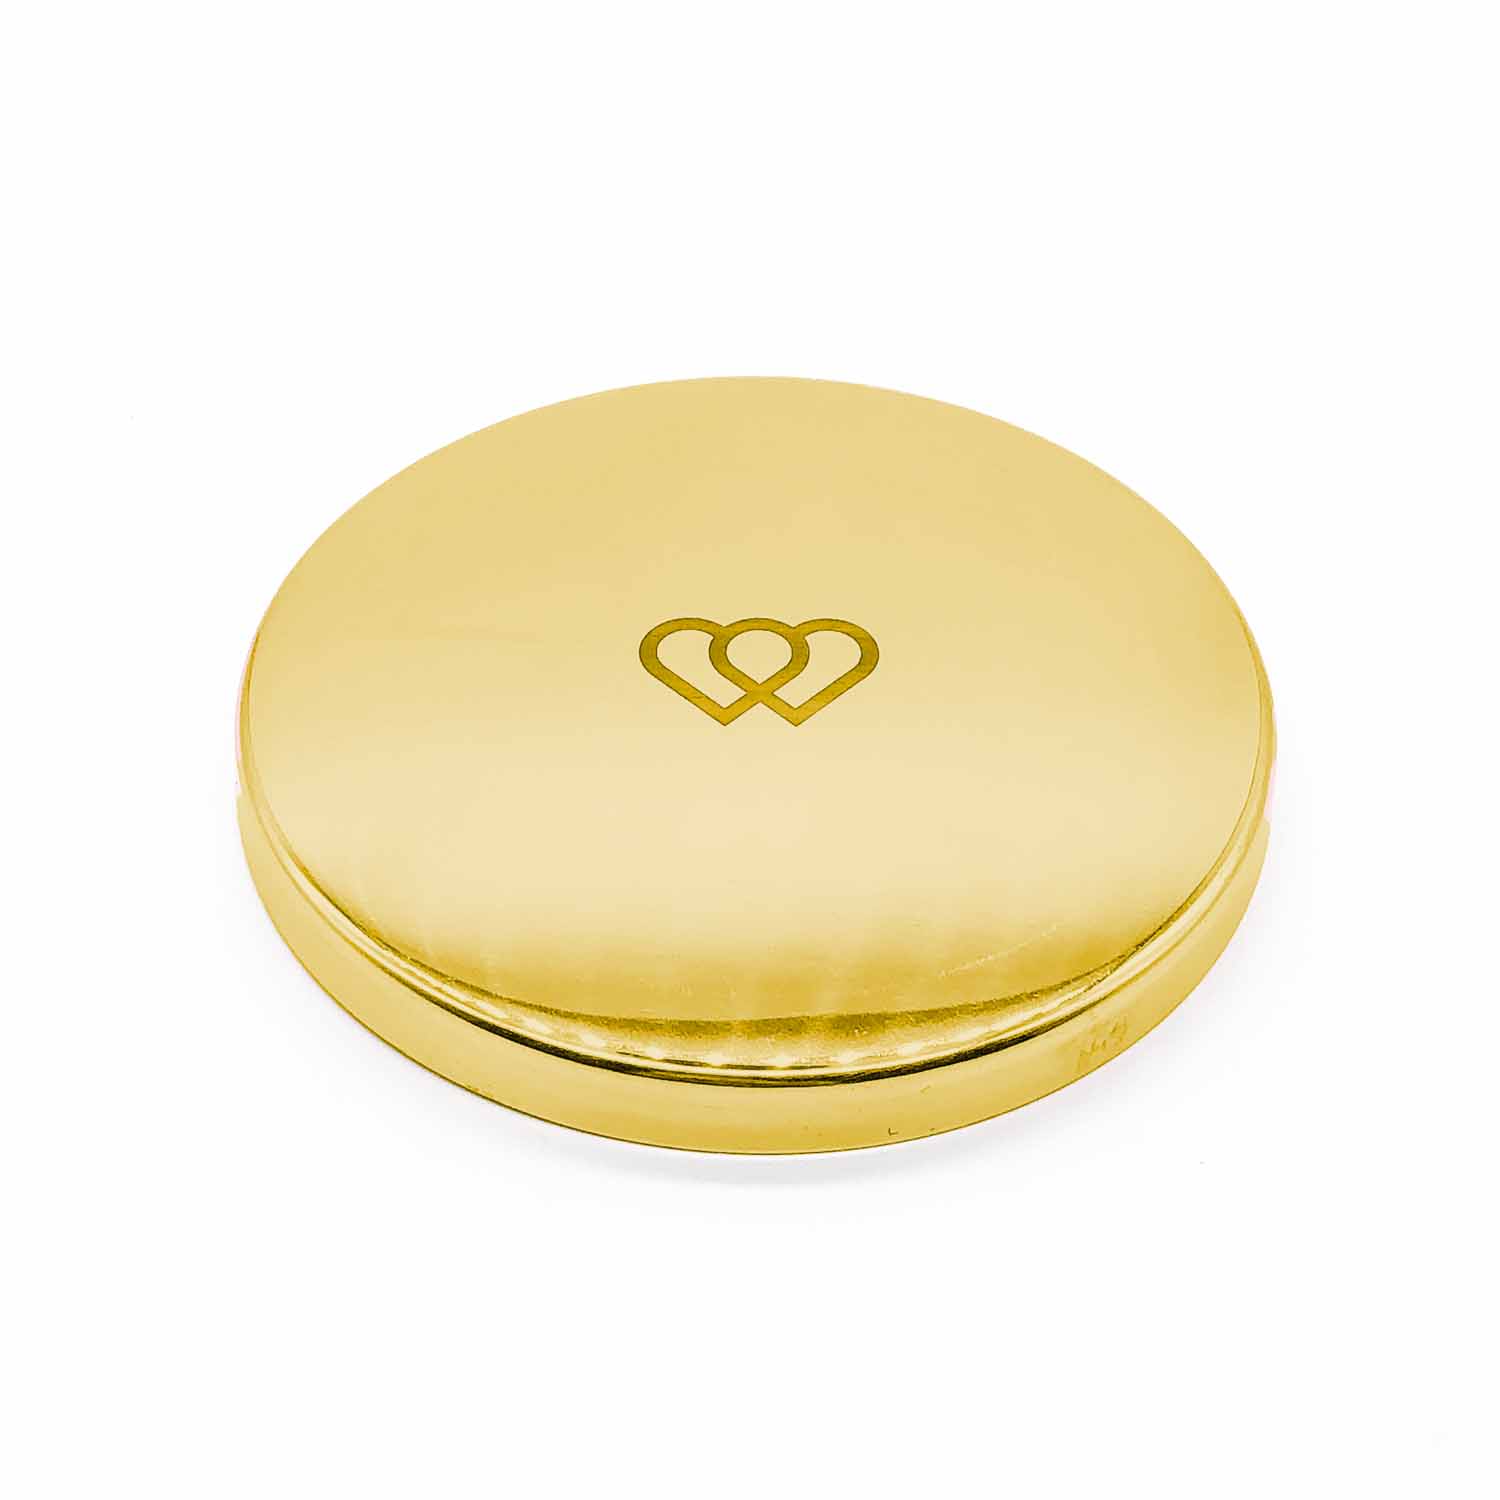 Hand engraved luxury gold metal lid 50cl 3 wicks - The Universal Soul Company